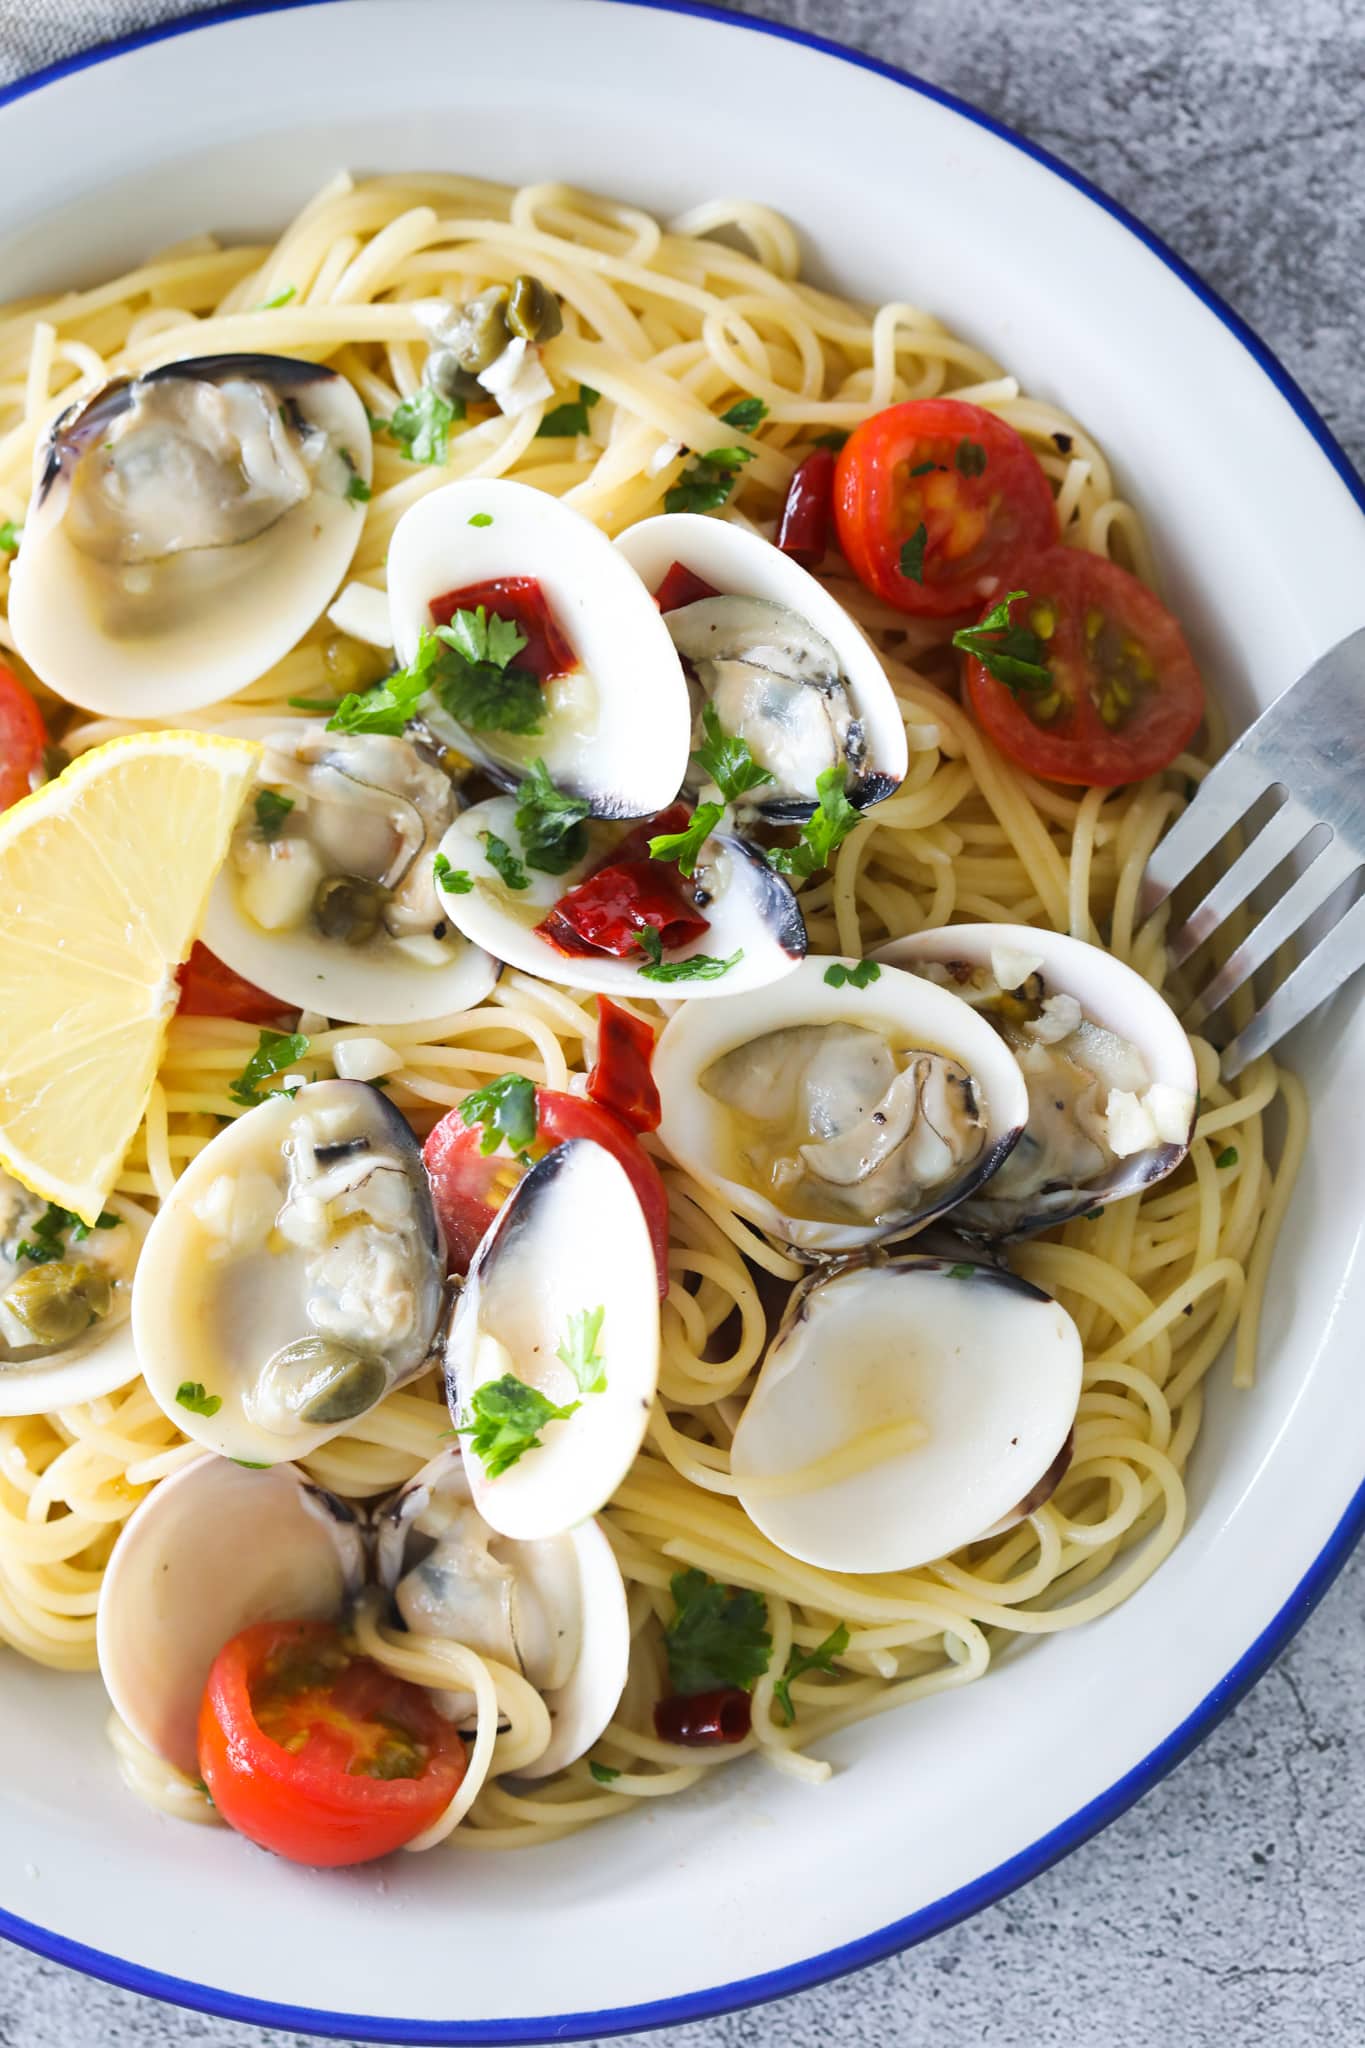 Capellini spaghetti with tomatoes and clams served in a plate.